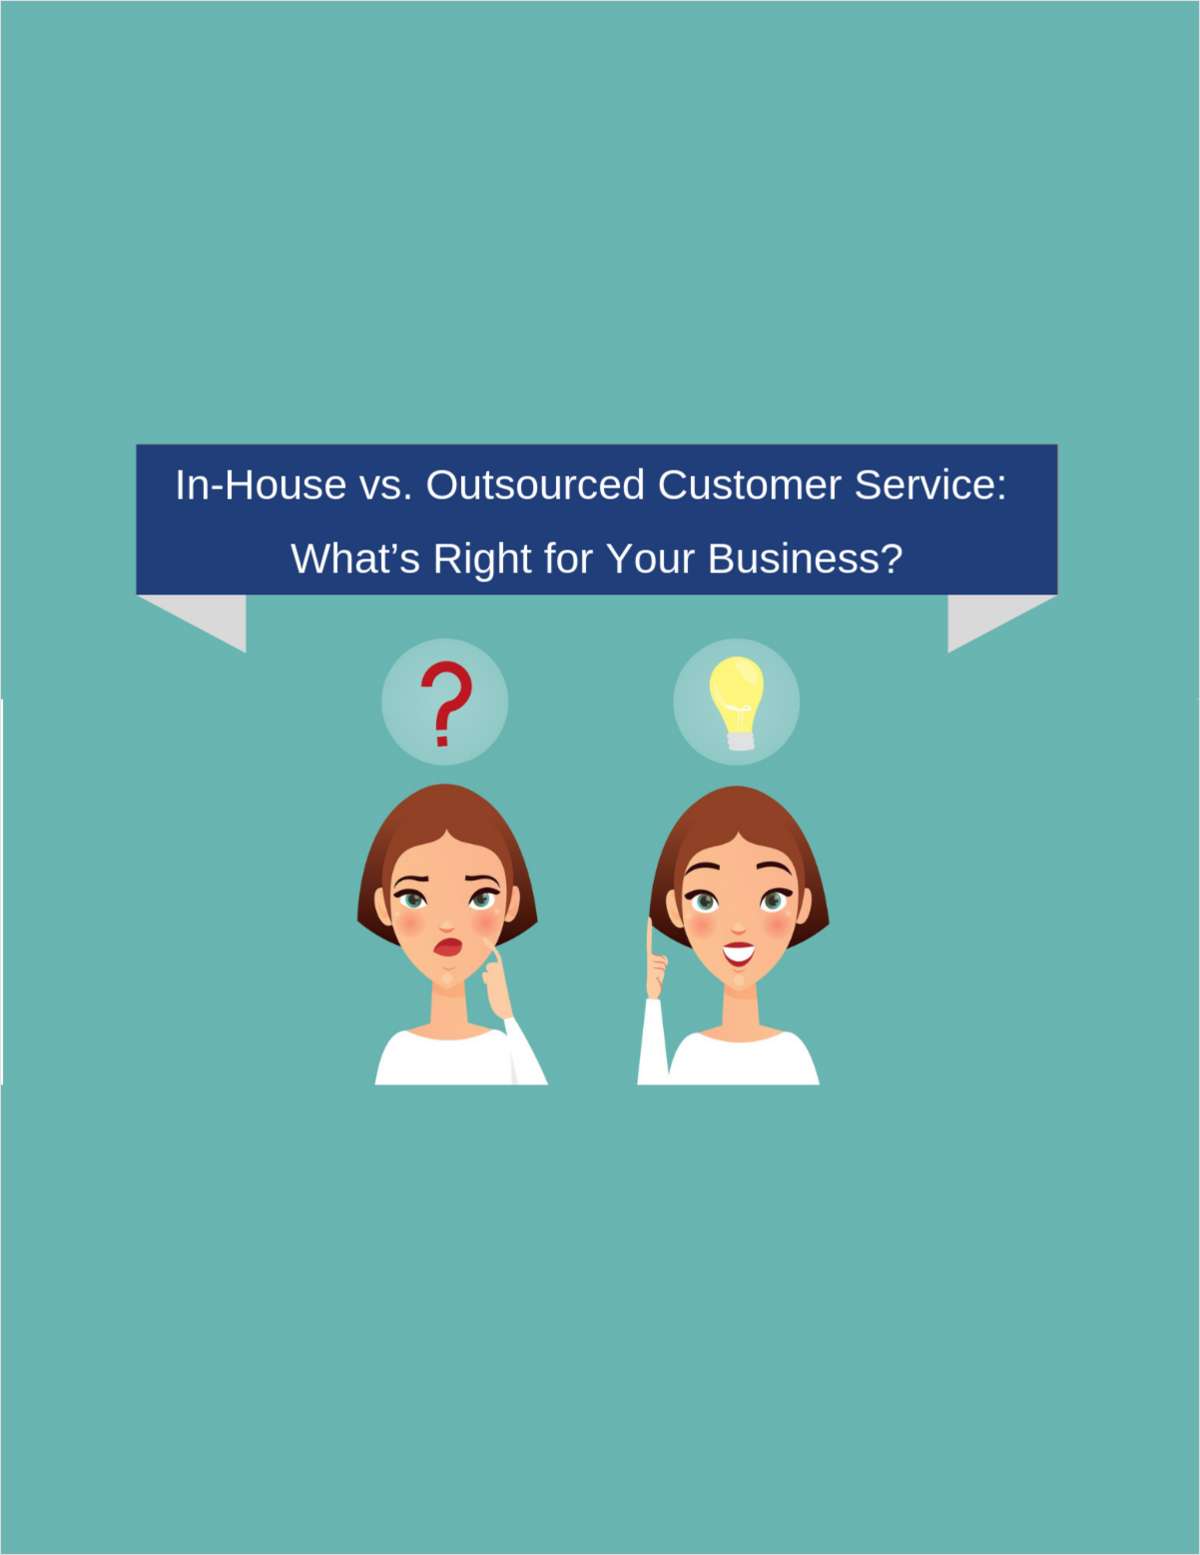 In-House vs Outsourced Customer Service: What's Right for Your Business?